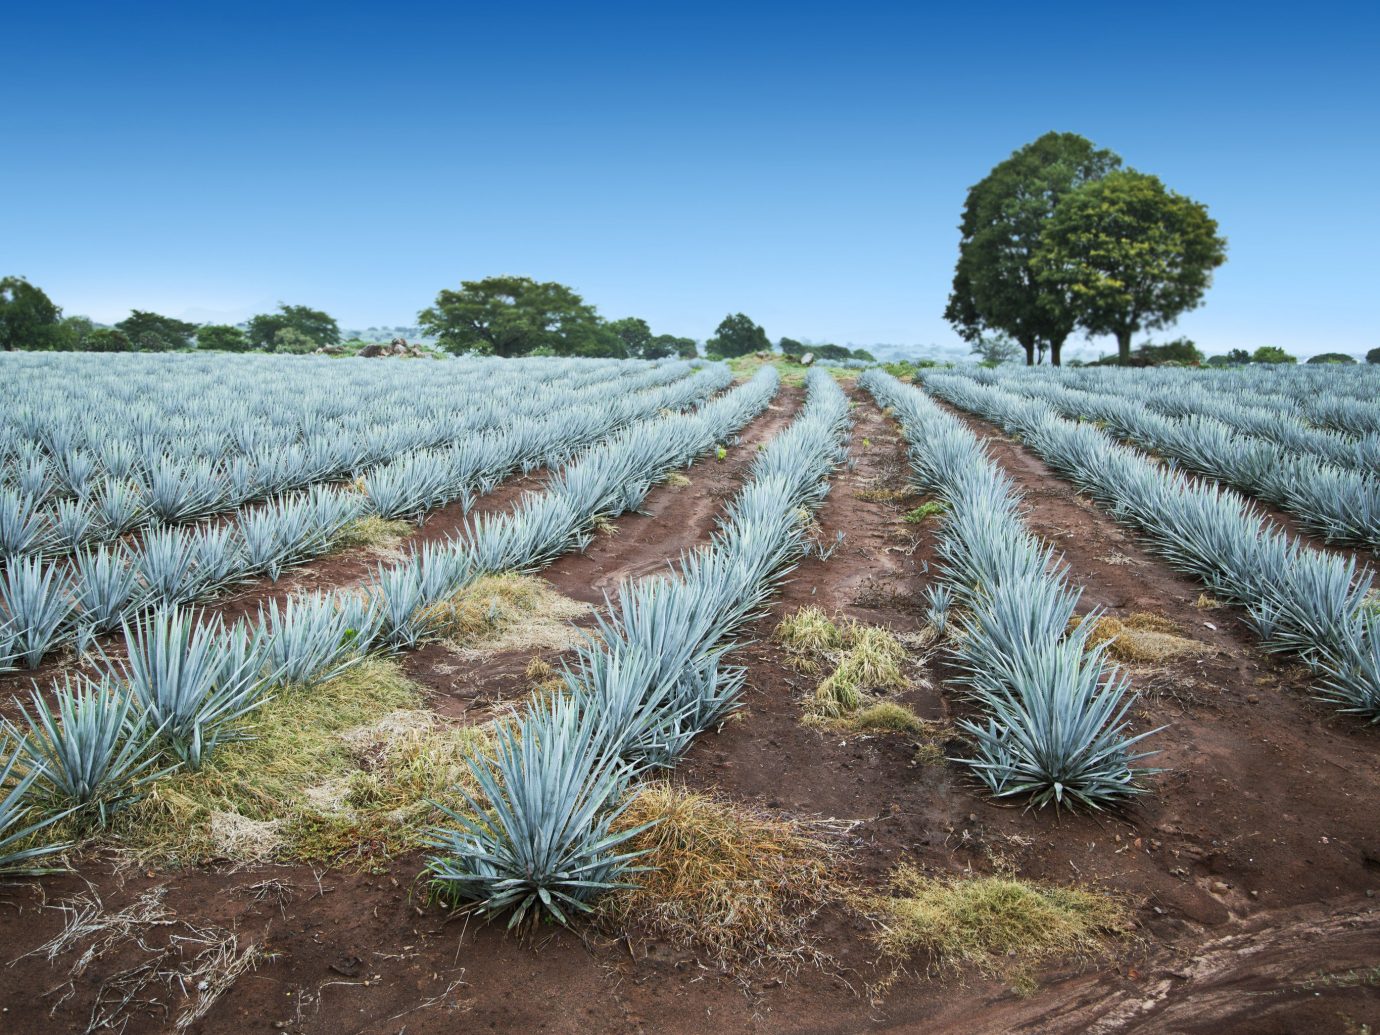 Trip Ideas plant field agave azul crop agriculture agave grass family tree grass plantation shrubland sky cactus flowering plant plant community landscape